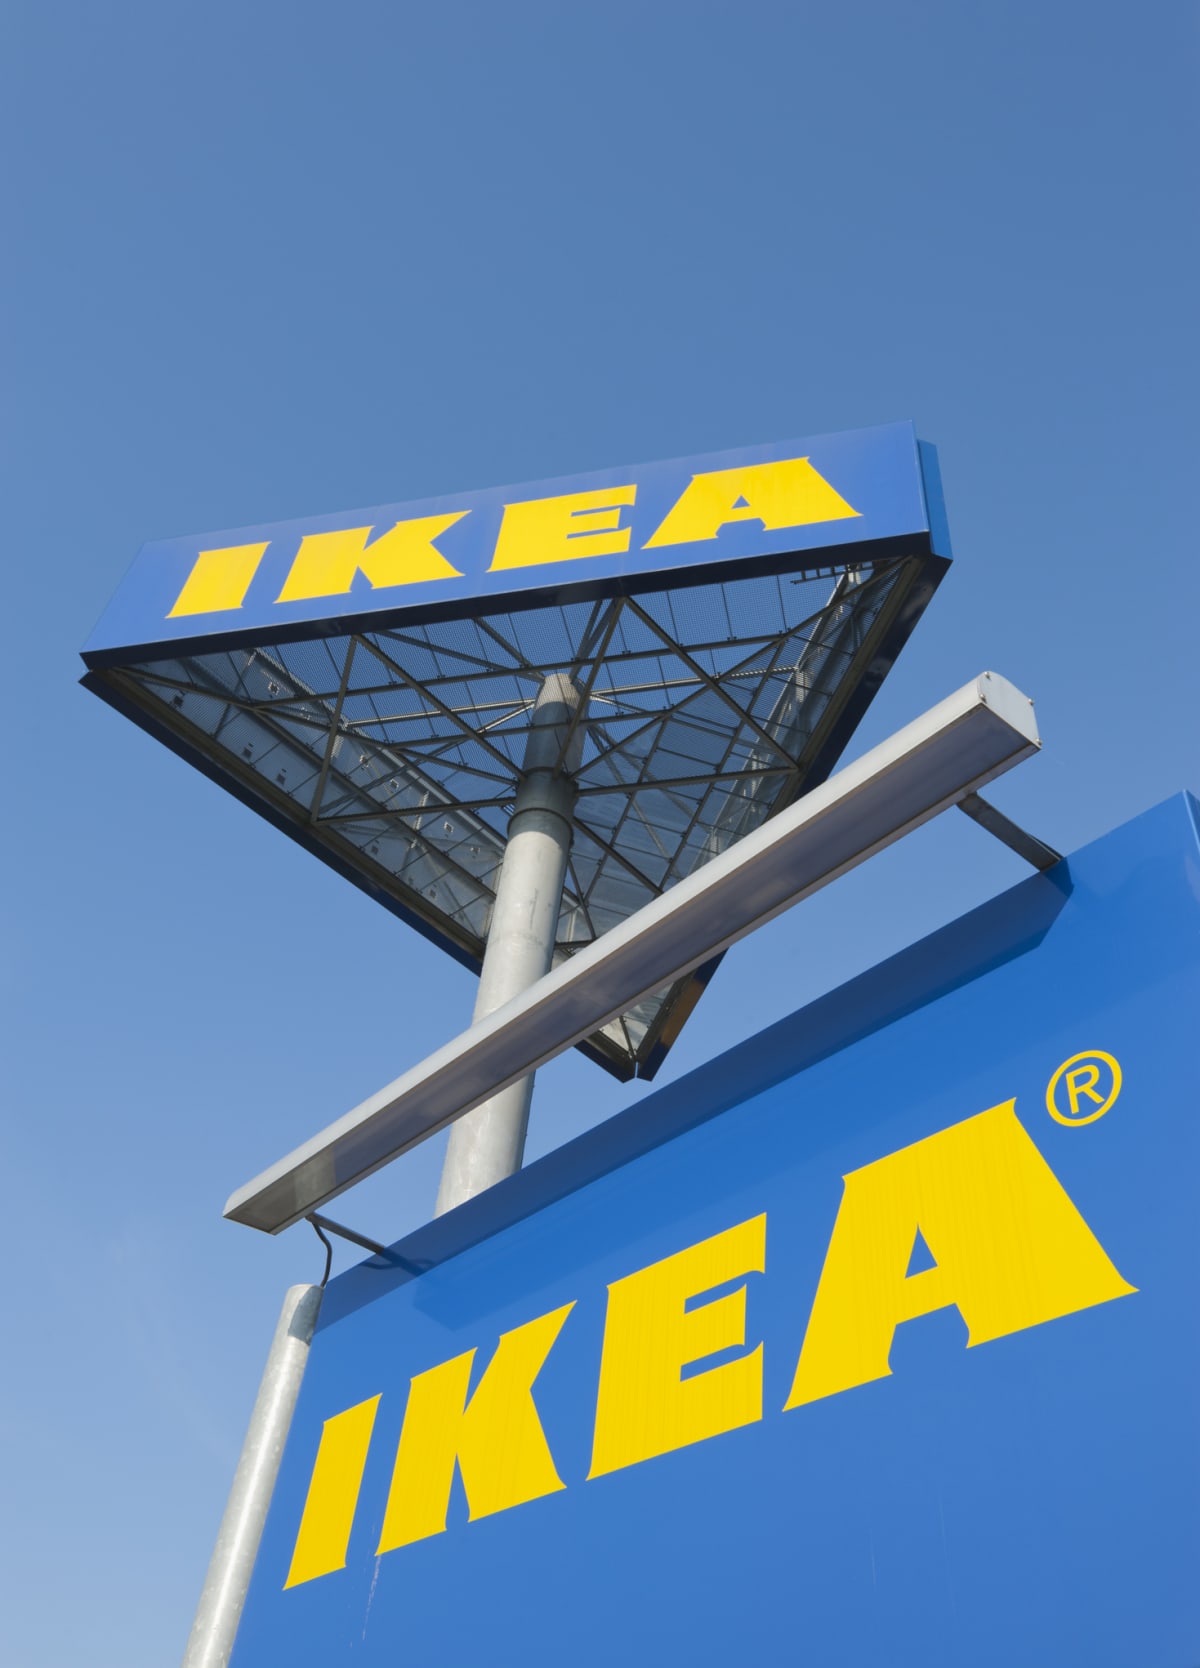 Ikea store sign